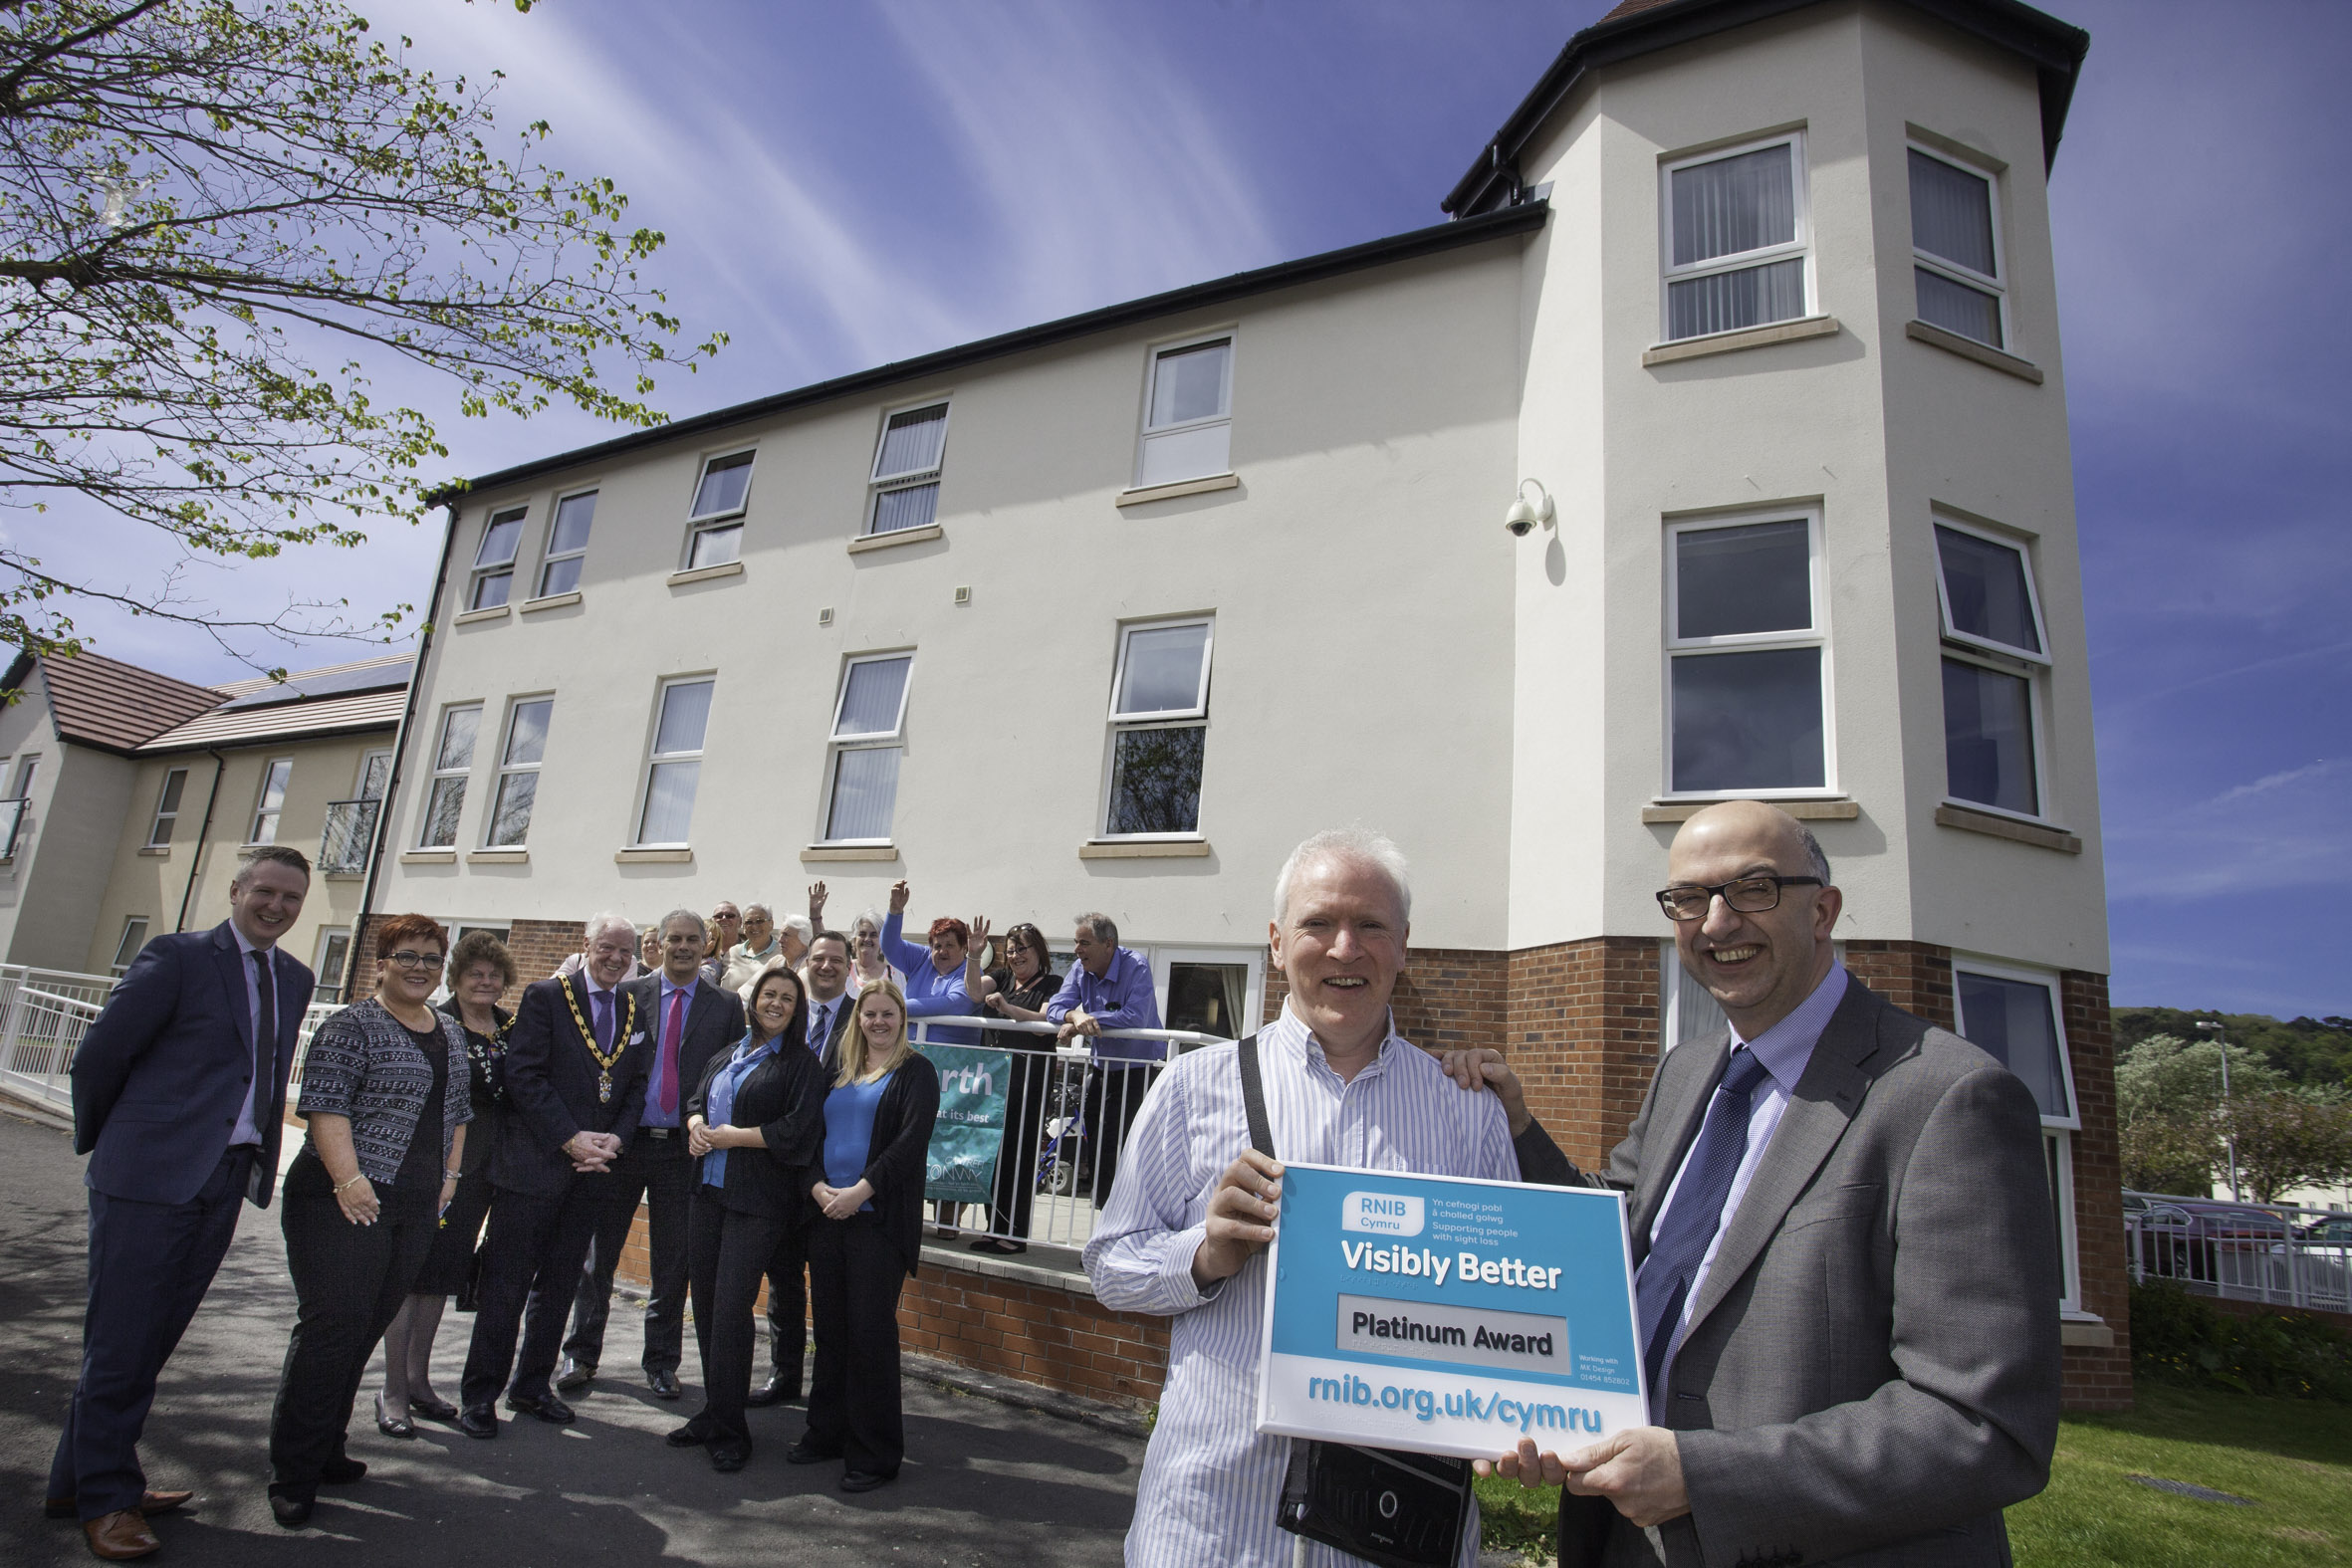 Flagship housing scheme wins award for being “visibly better”